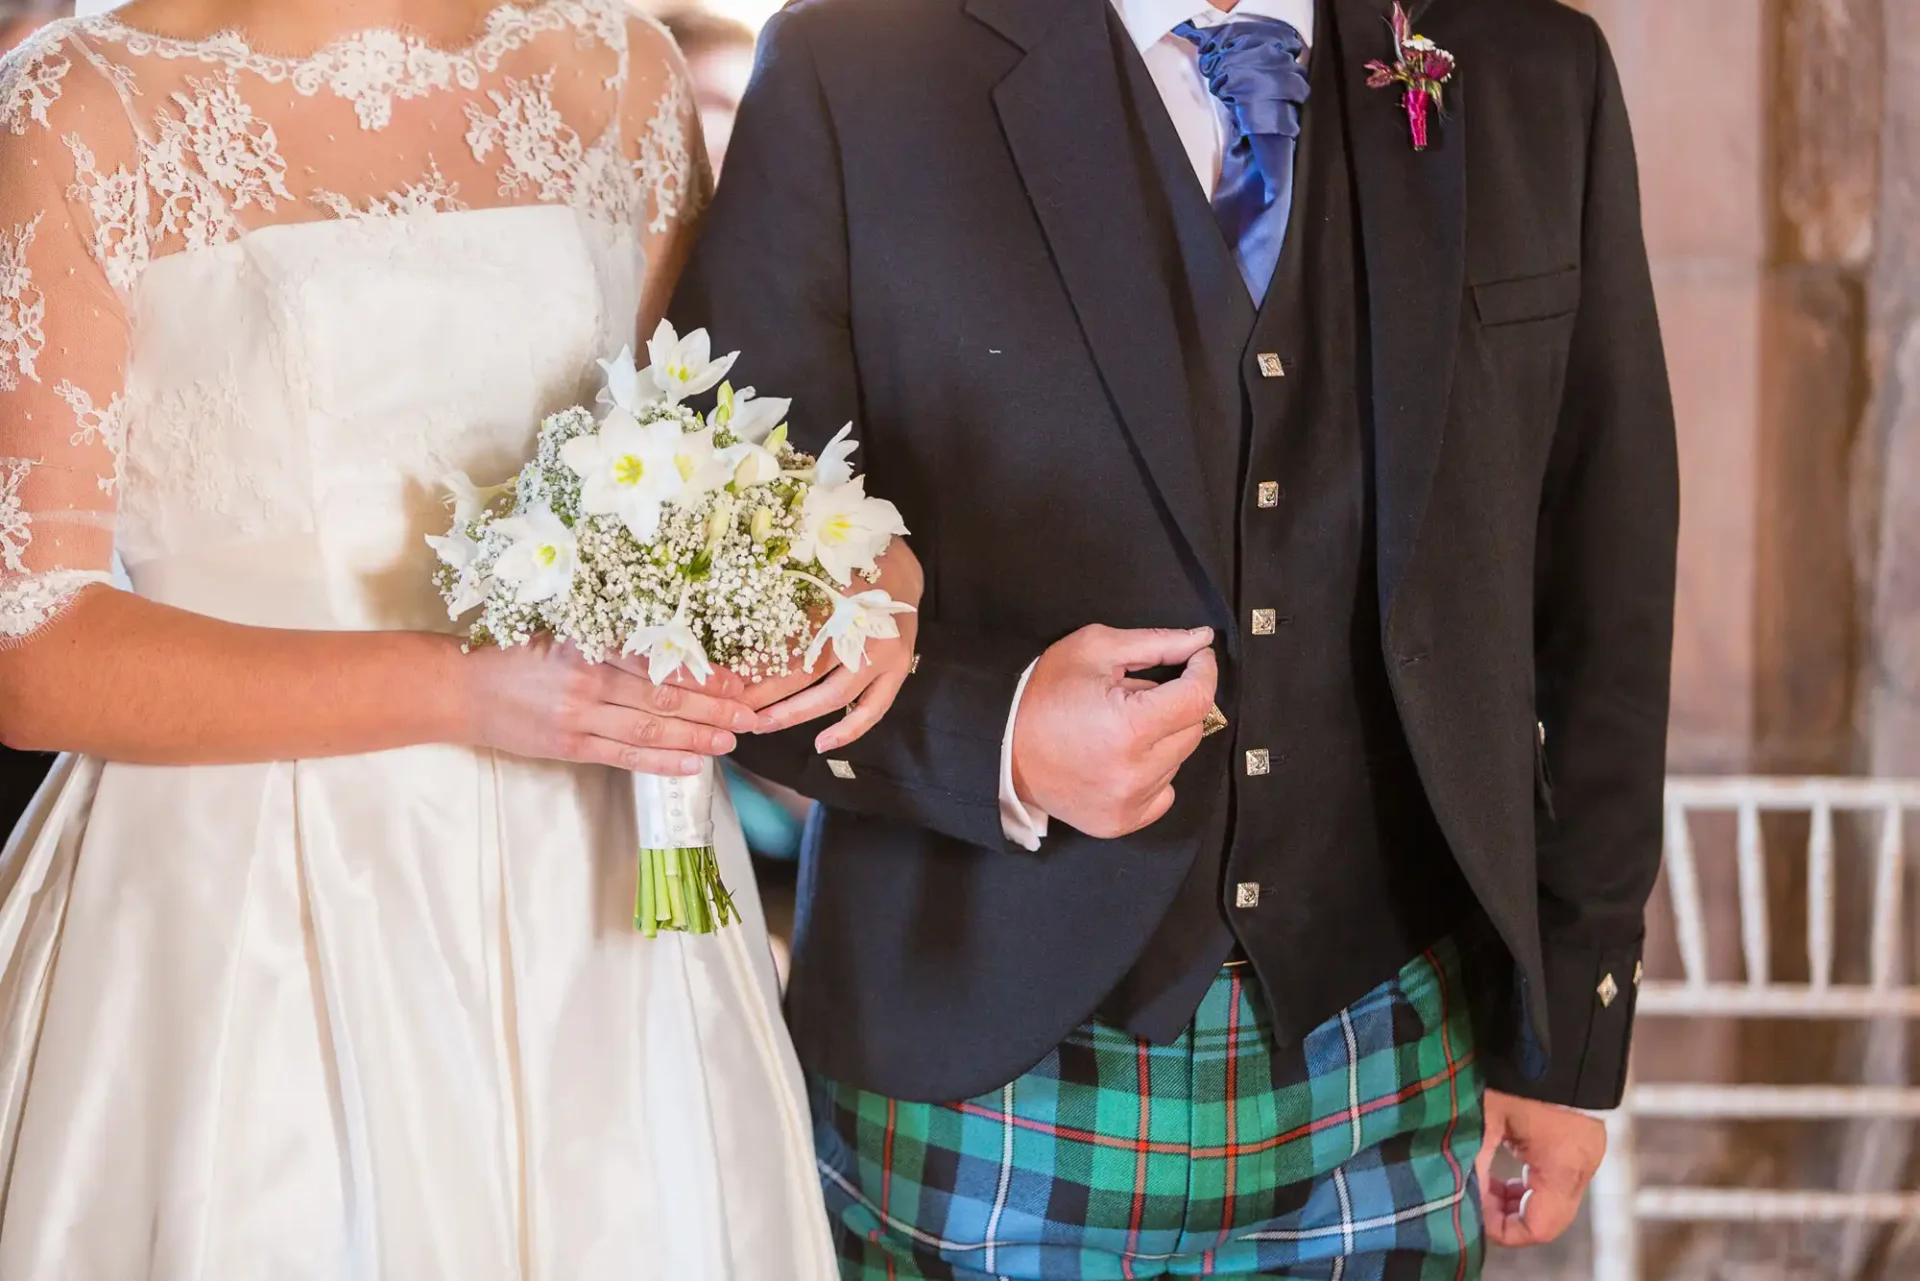 Bride in a lace dress and groom in a tartan kilt holding hands and a white bouquet at a wedding ceremony.